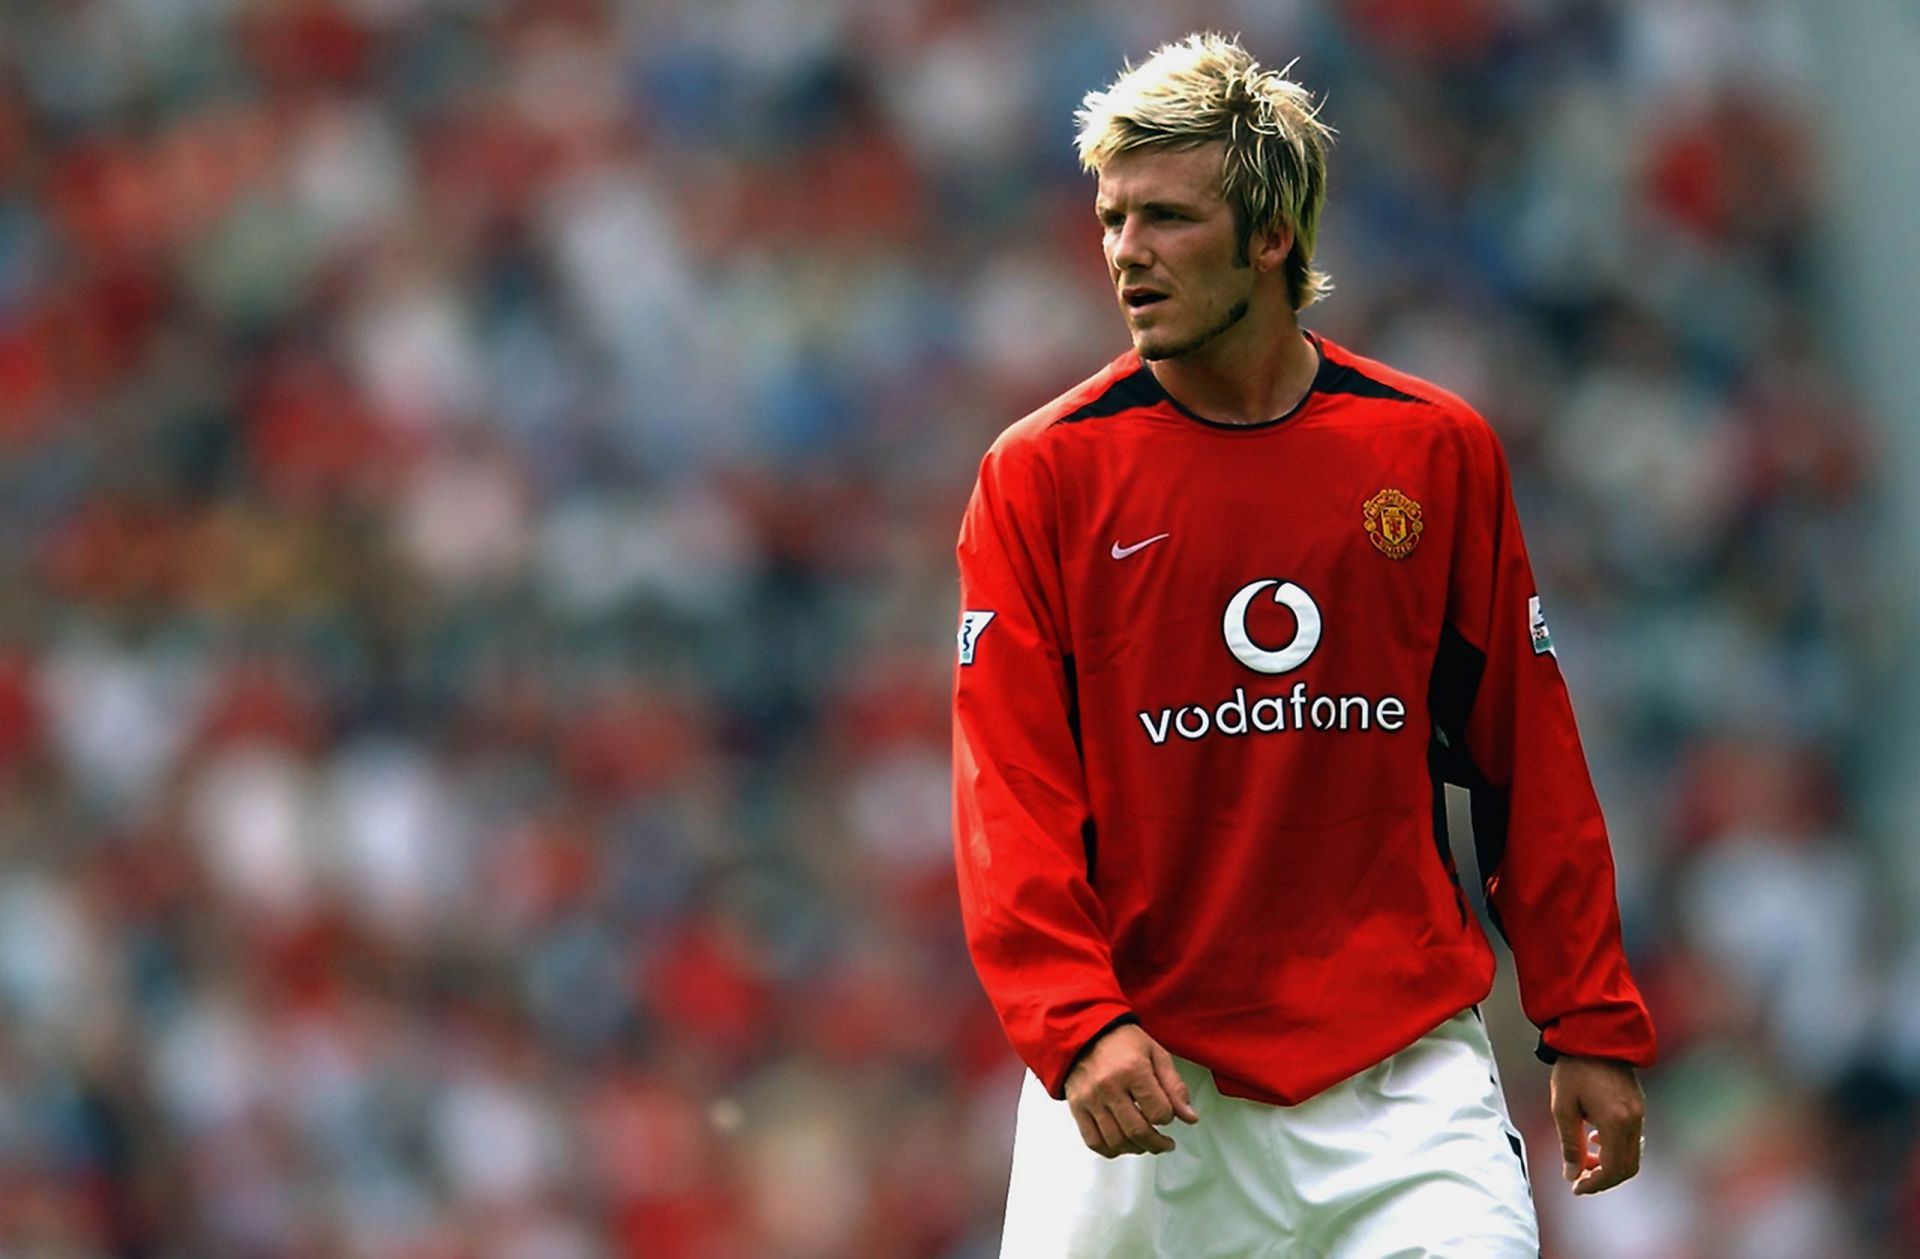 David Beckham was one of the first superstar footballers of the Premier League era